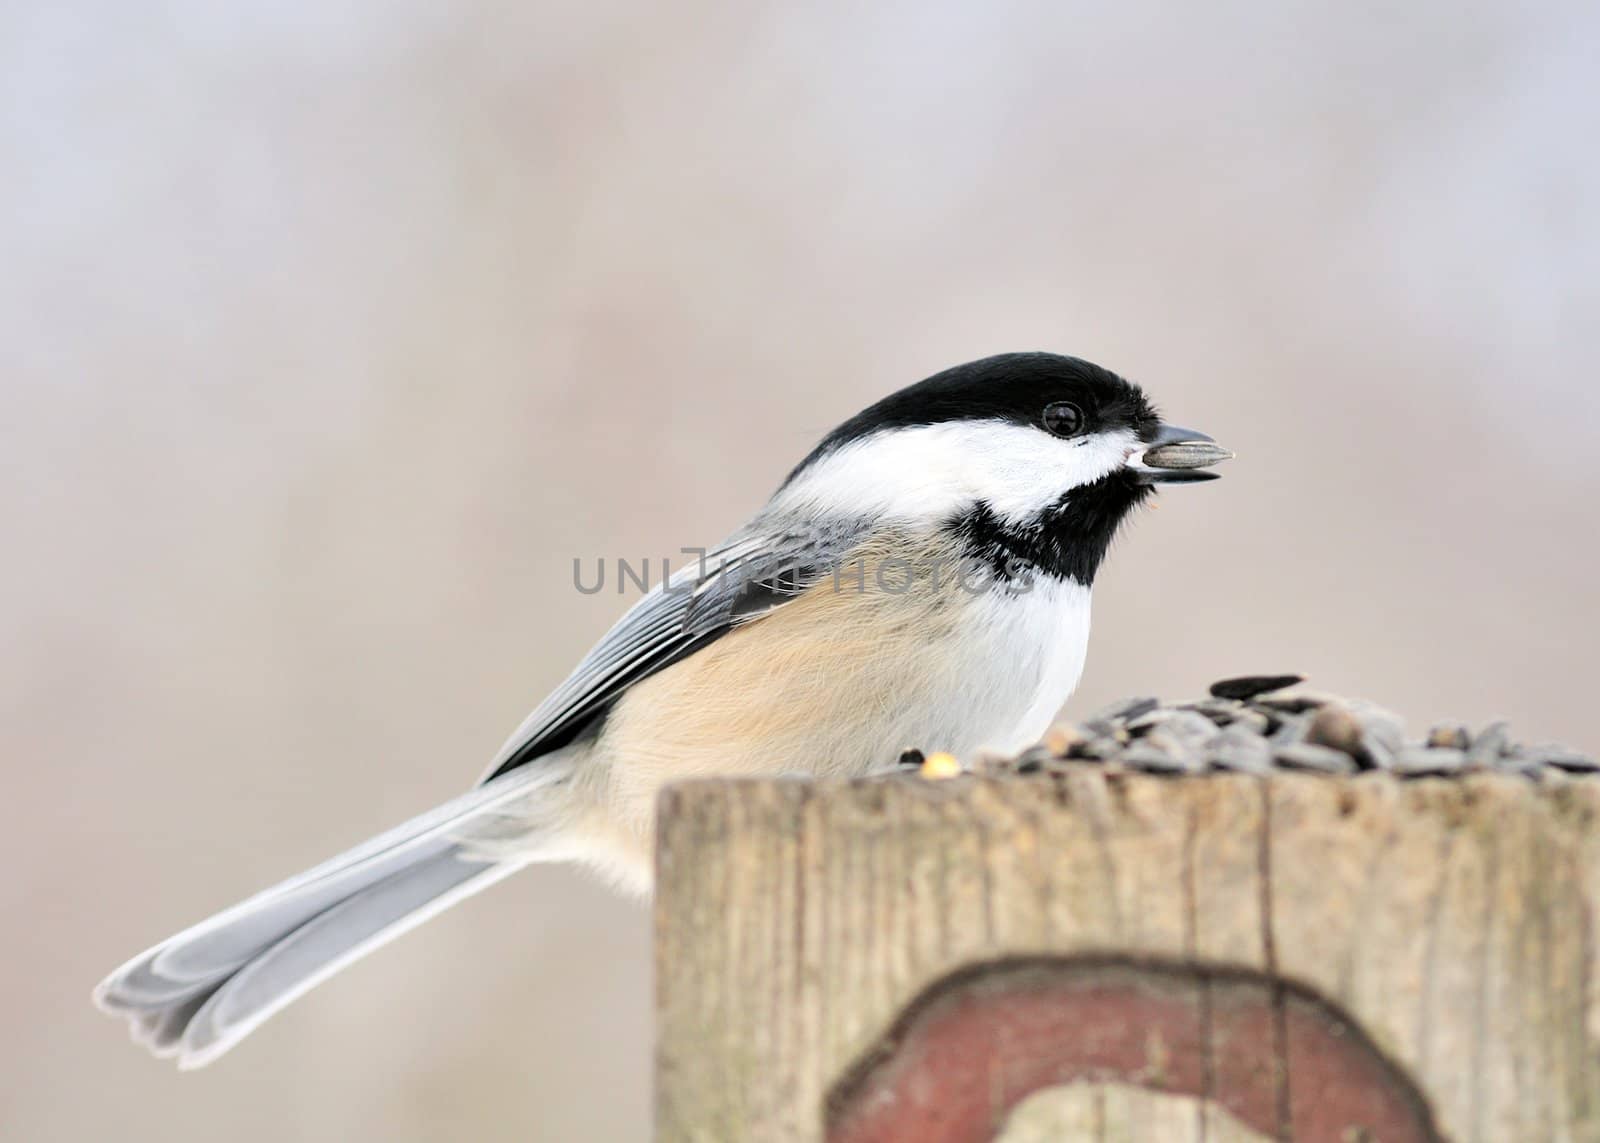 A black-capped chickadee perched on a wooden post eating bird seed.